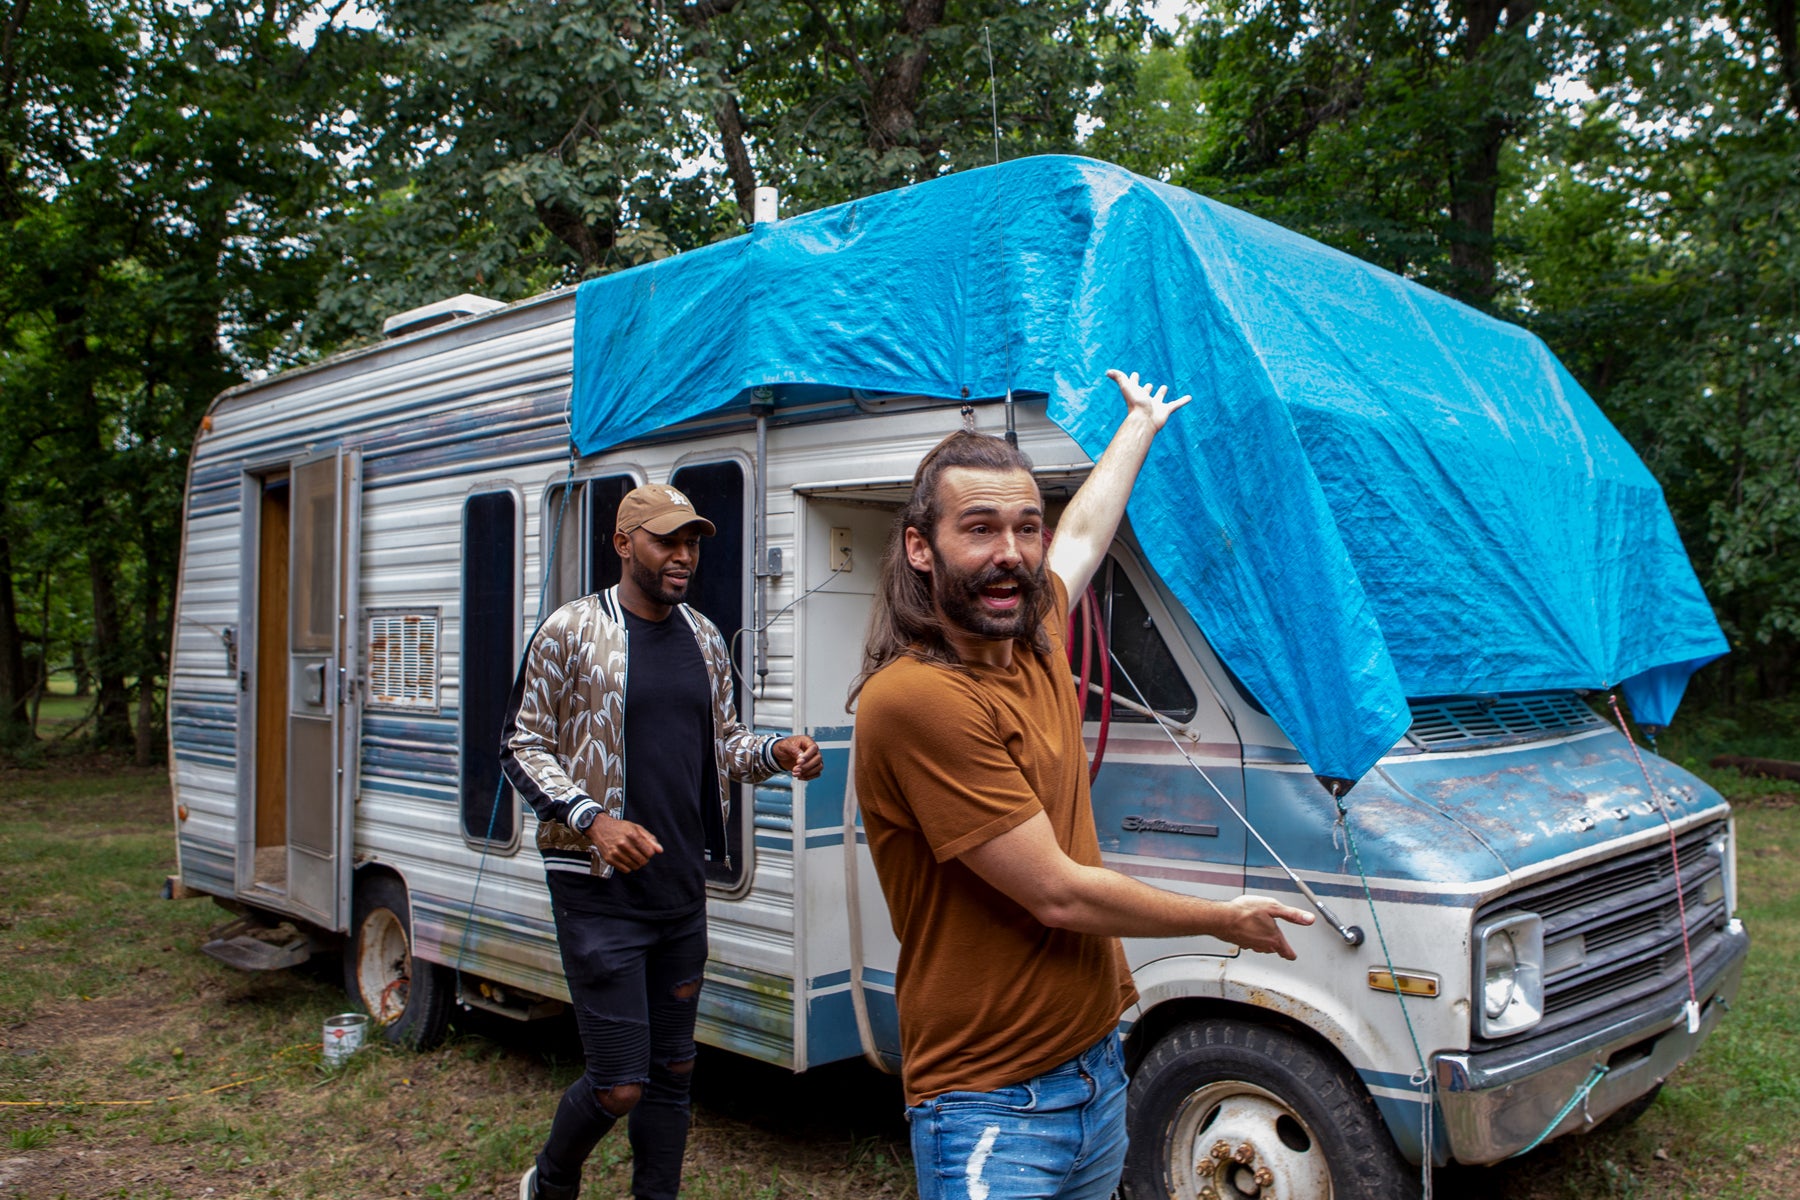 Jonathan gestures toward a camper van covered in a tarp while Karamo stands by in an episode of Queer Eye.